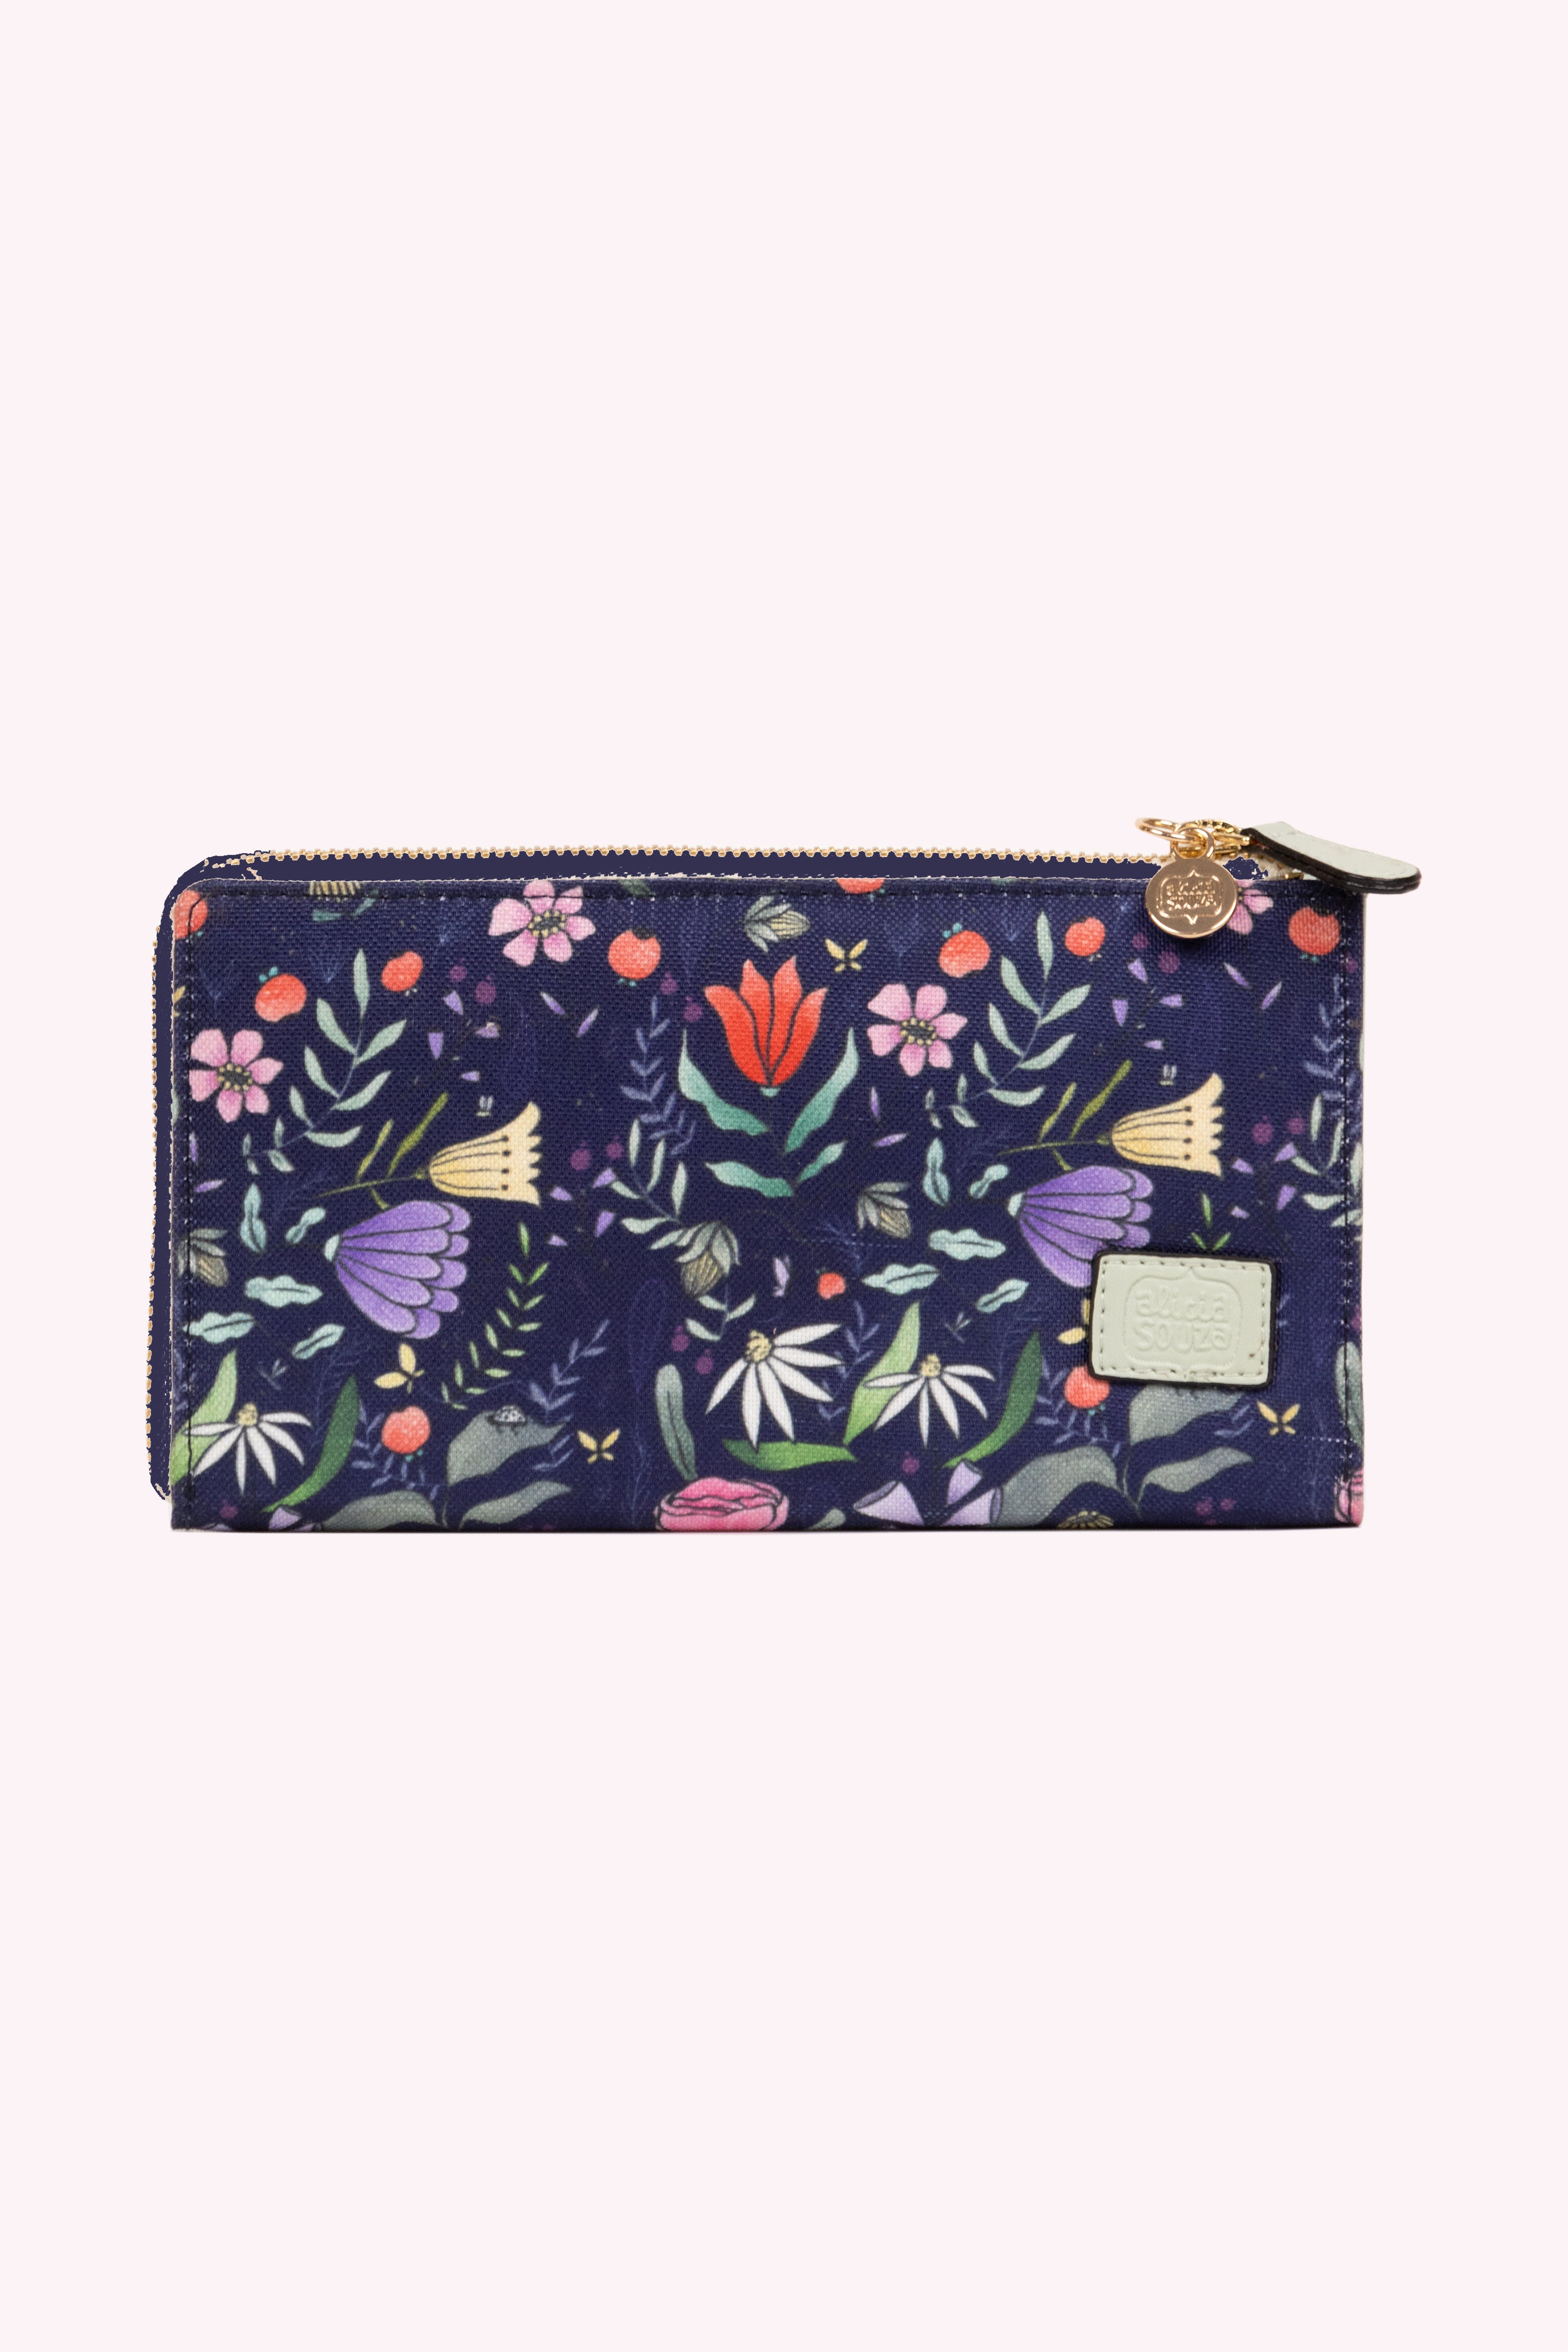 Cath Kidston Dusk Floral Spaced Zip Wallet in Navy, Navy, L :  Amazon.com.au: Clothing, Shoes & Accessories